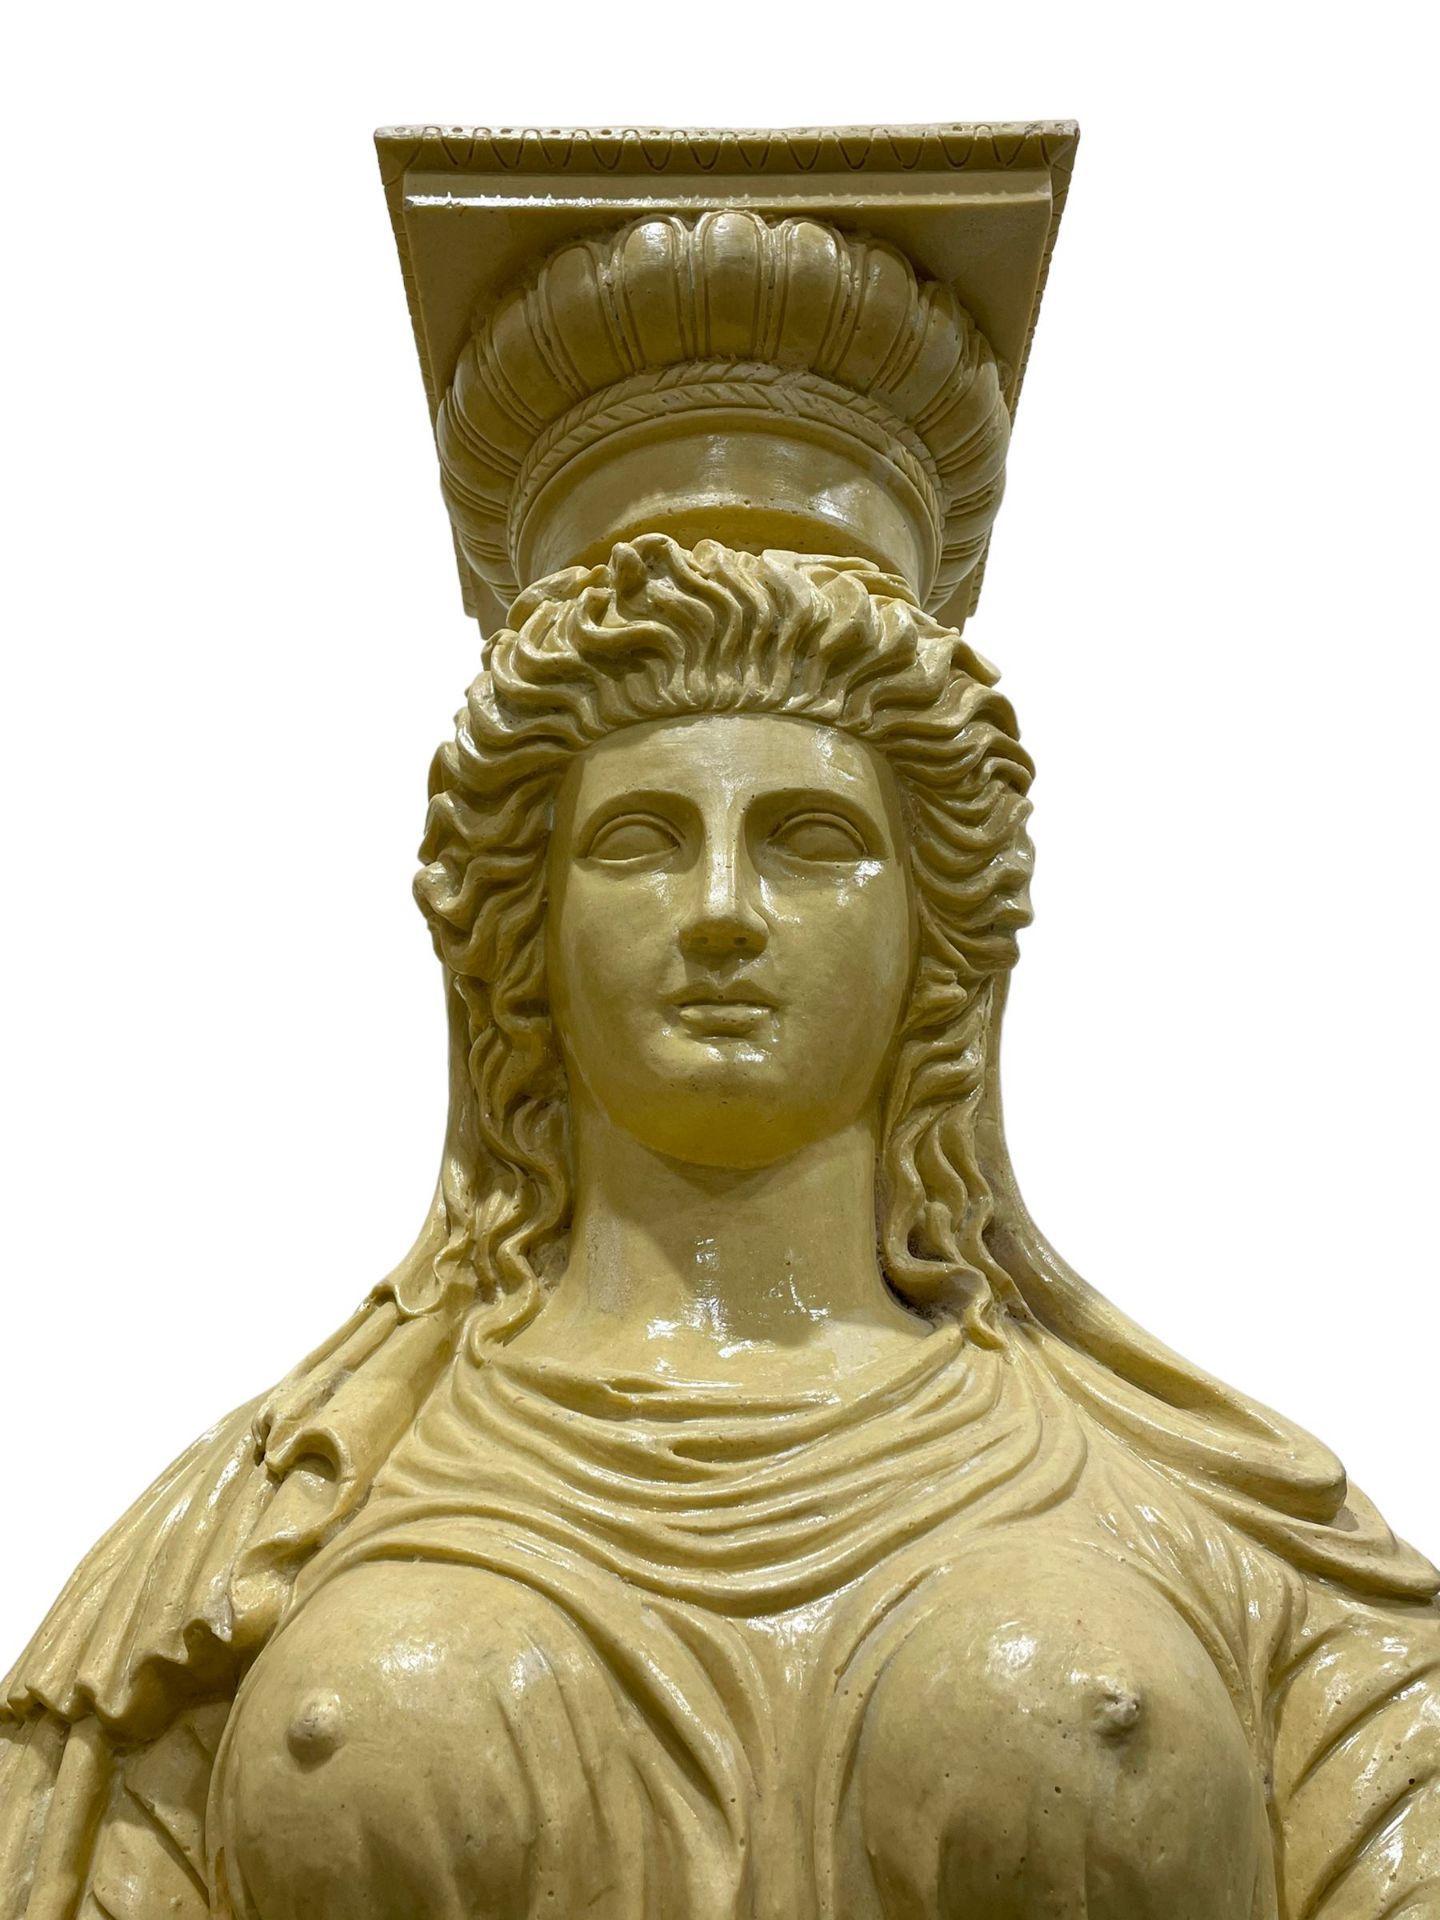 A Pair Of Greek Style Caryatid Columns As an architectural support for an entablature on the head of - Image 3 of 3